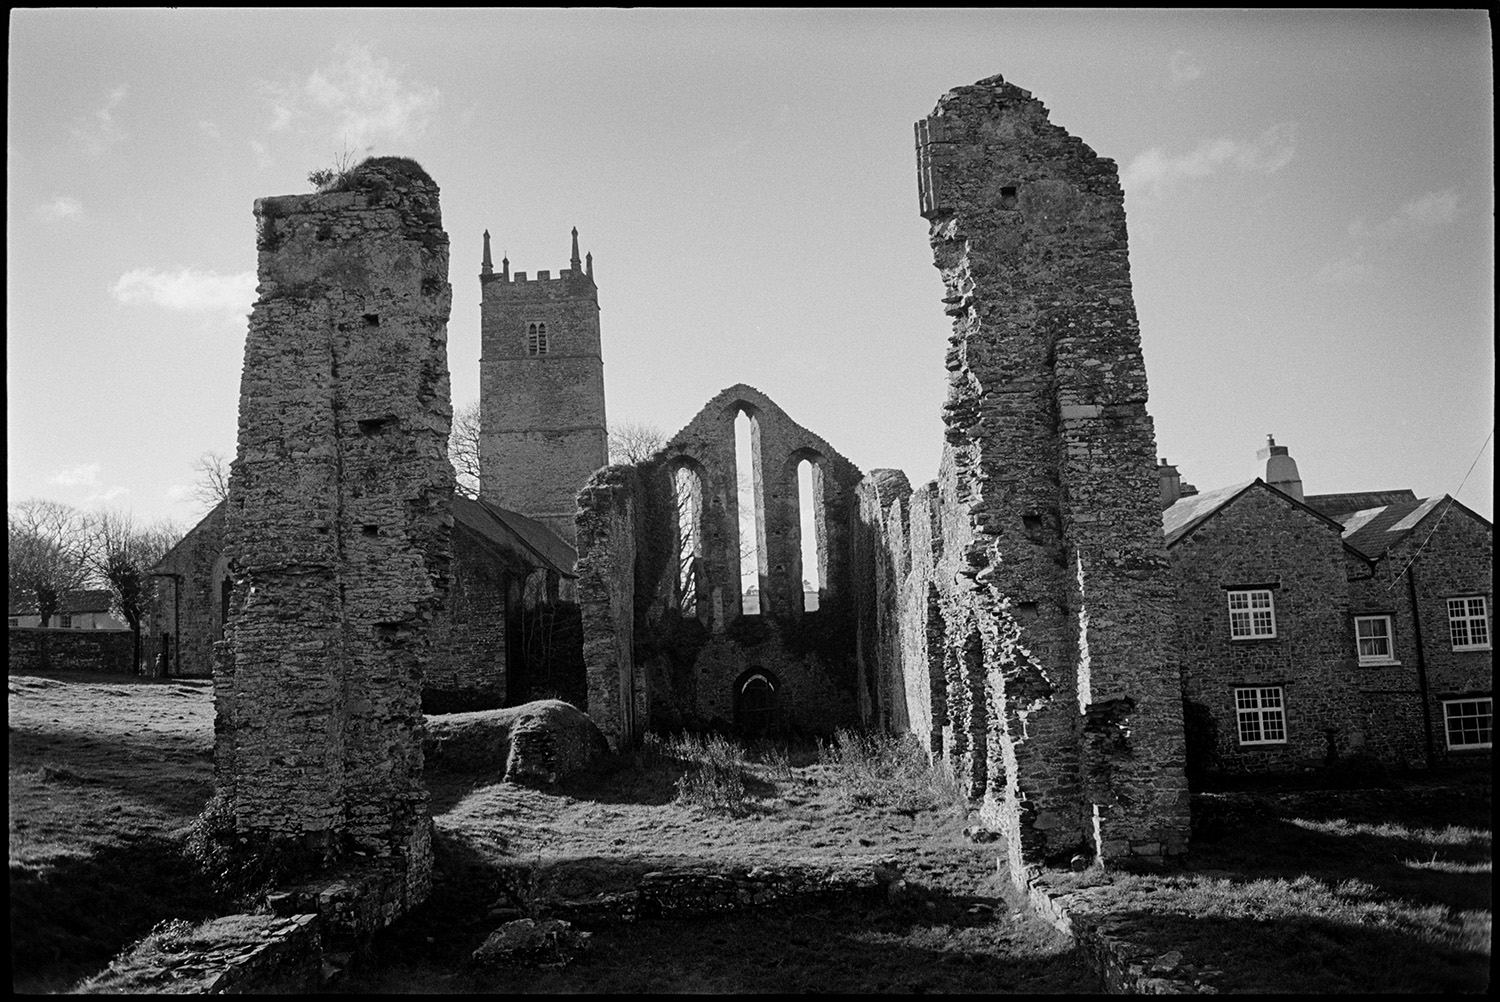 Ruined priory and graveyard.
[The ruined remains of Frithelstock Priory, with adjoining houses, In the background the tower of  the Church of St Mary and St Gregory, Frithelstock is visible.]